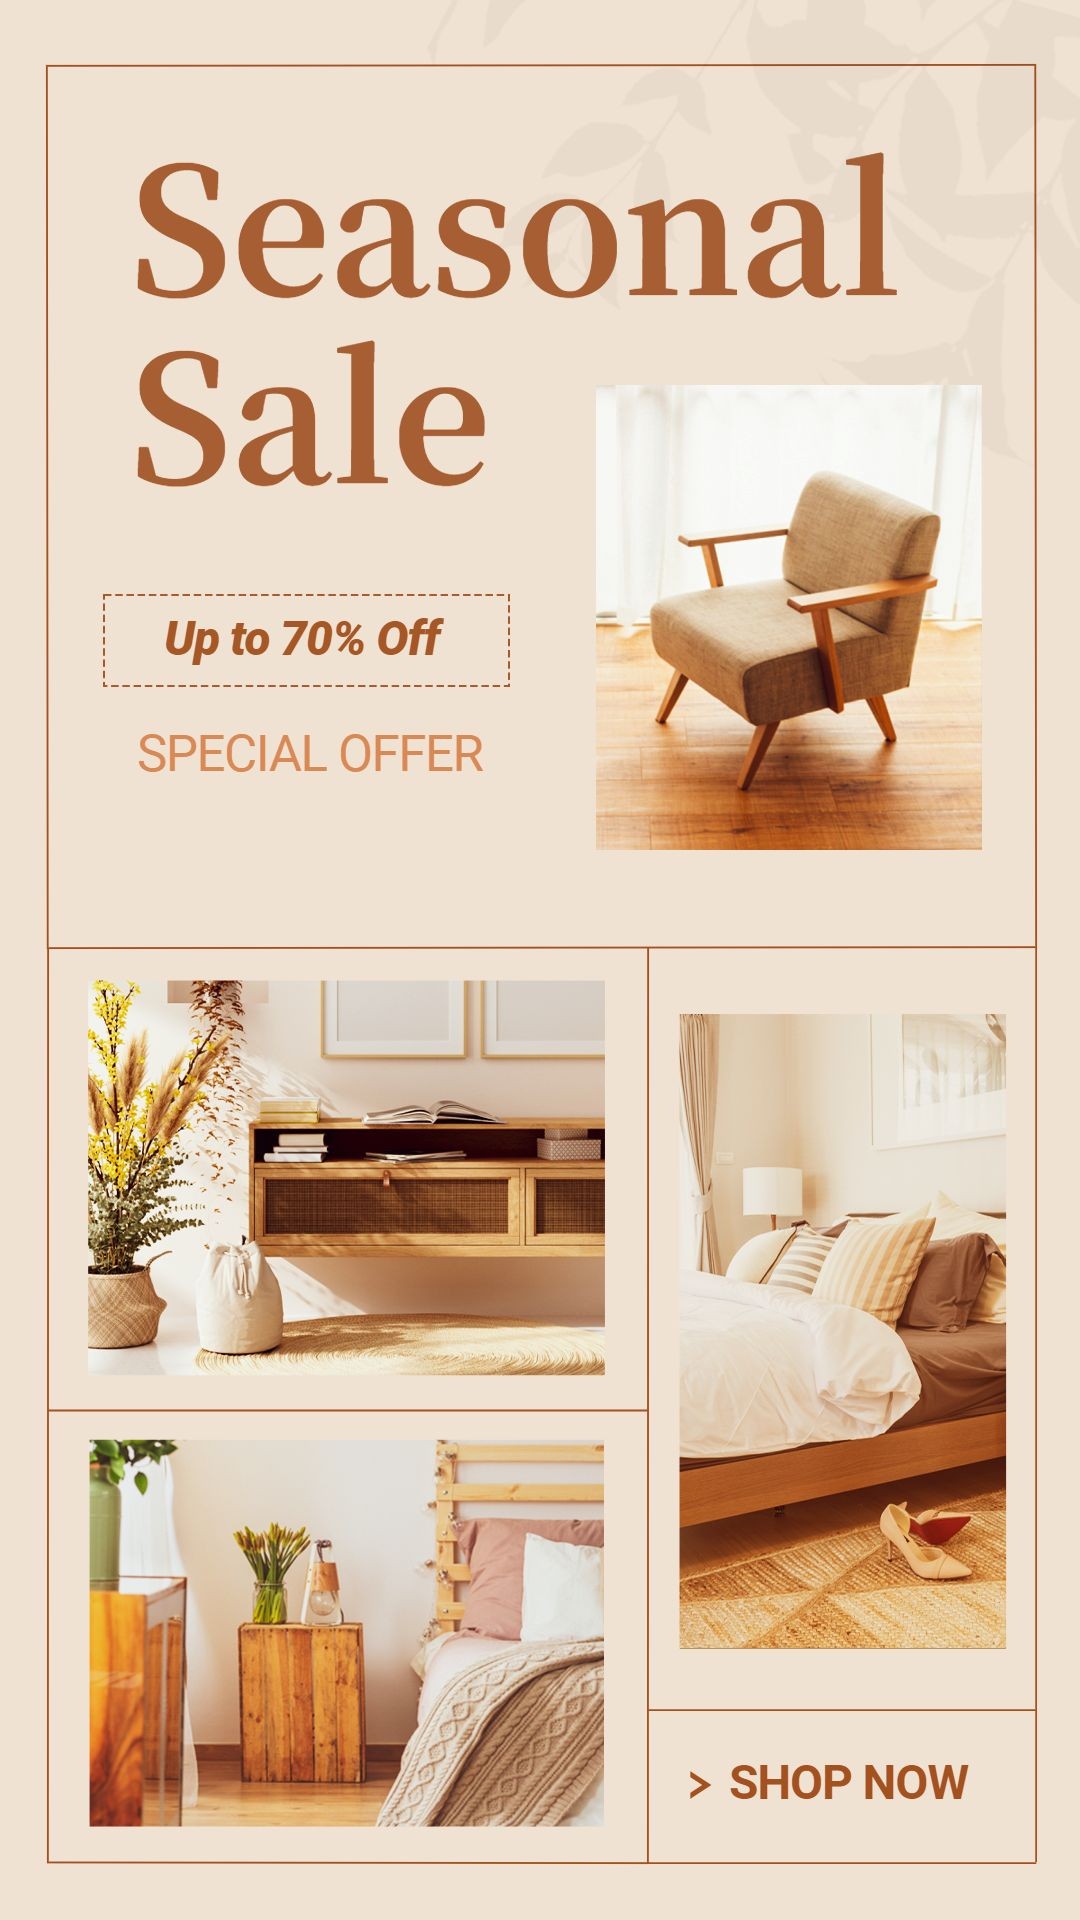 Bed Display Simple Furniture Sale Promo Ecommerce Story预览效果